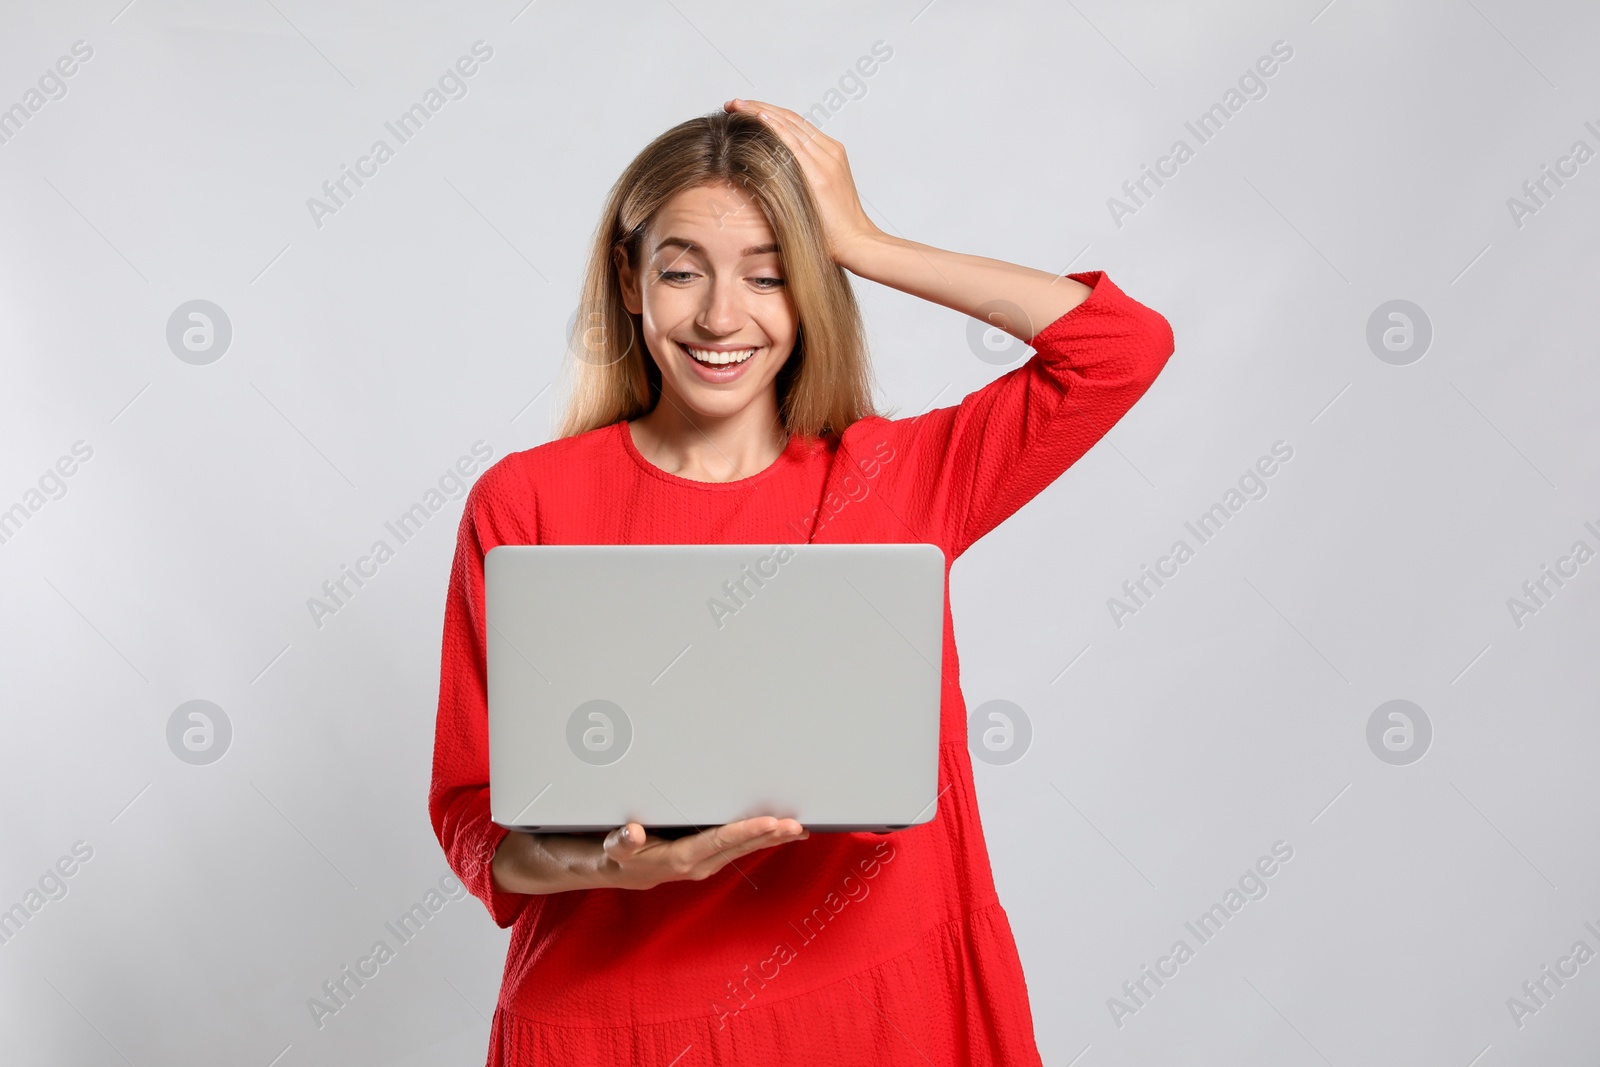 Photo of Portrait of emotional woman with modern laptop on light grey background